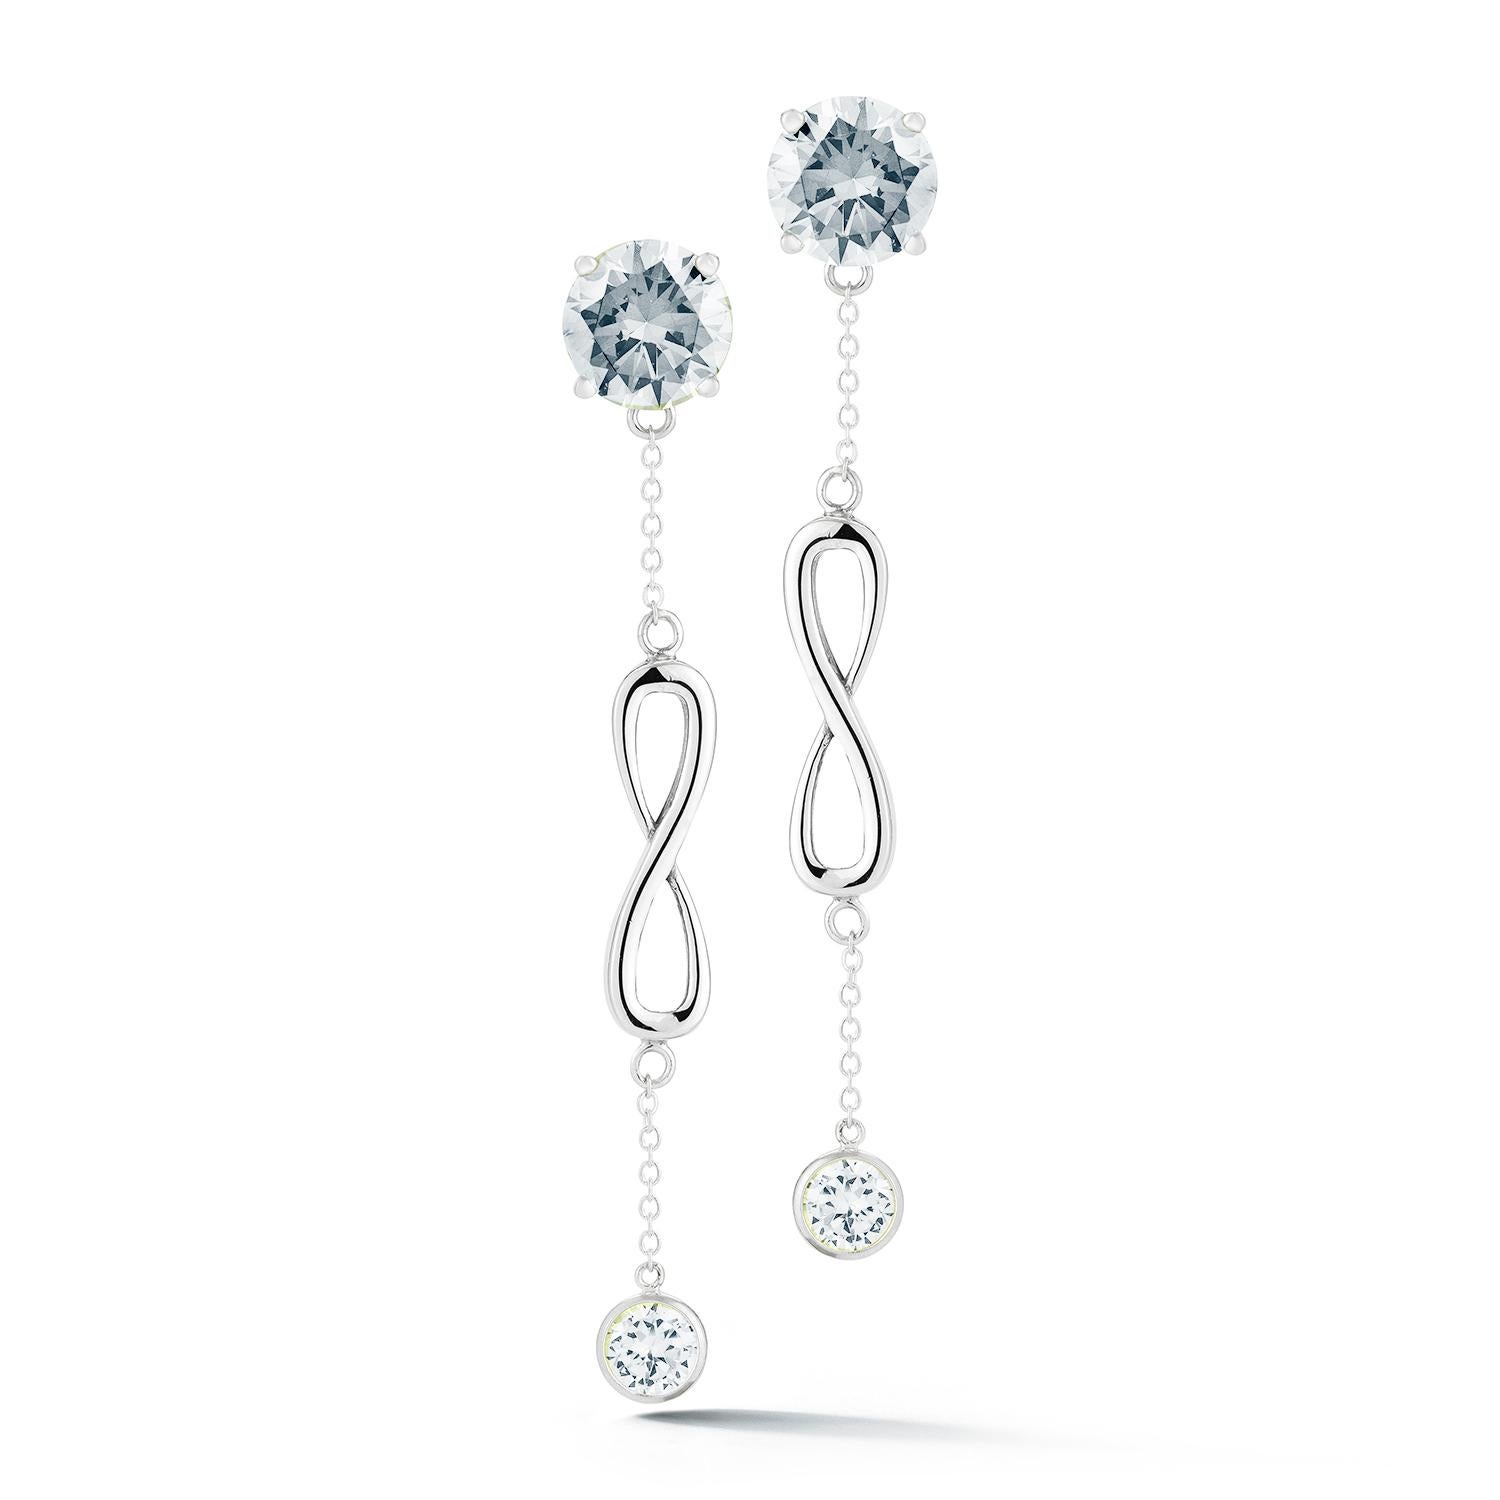 Designed in NYC

.925 Sterling Silver 2 x 20 mm Dark Blue Topaz Double Stone Infinity Chain Earrings. When it comes to self-expression, the style possibilities are endless. Double stone infinity chain earrings:

.925 sterling silver 
High-polish